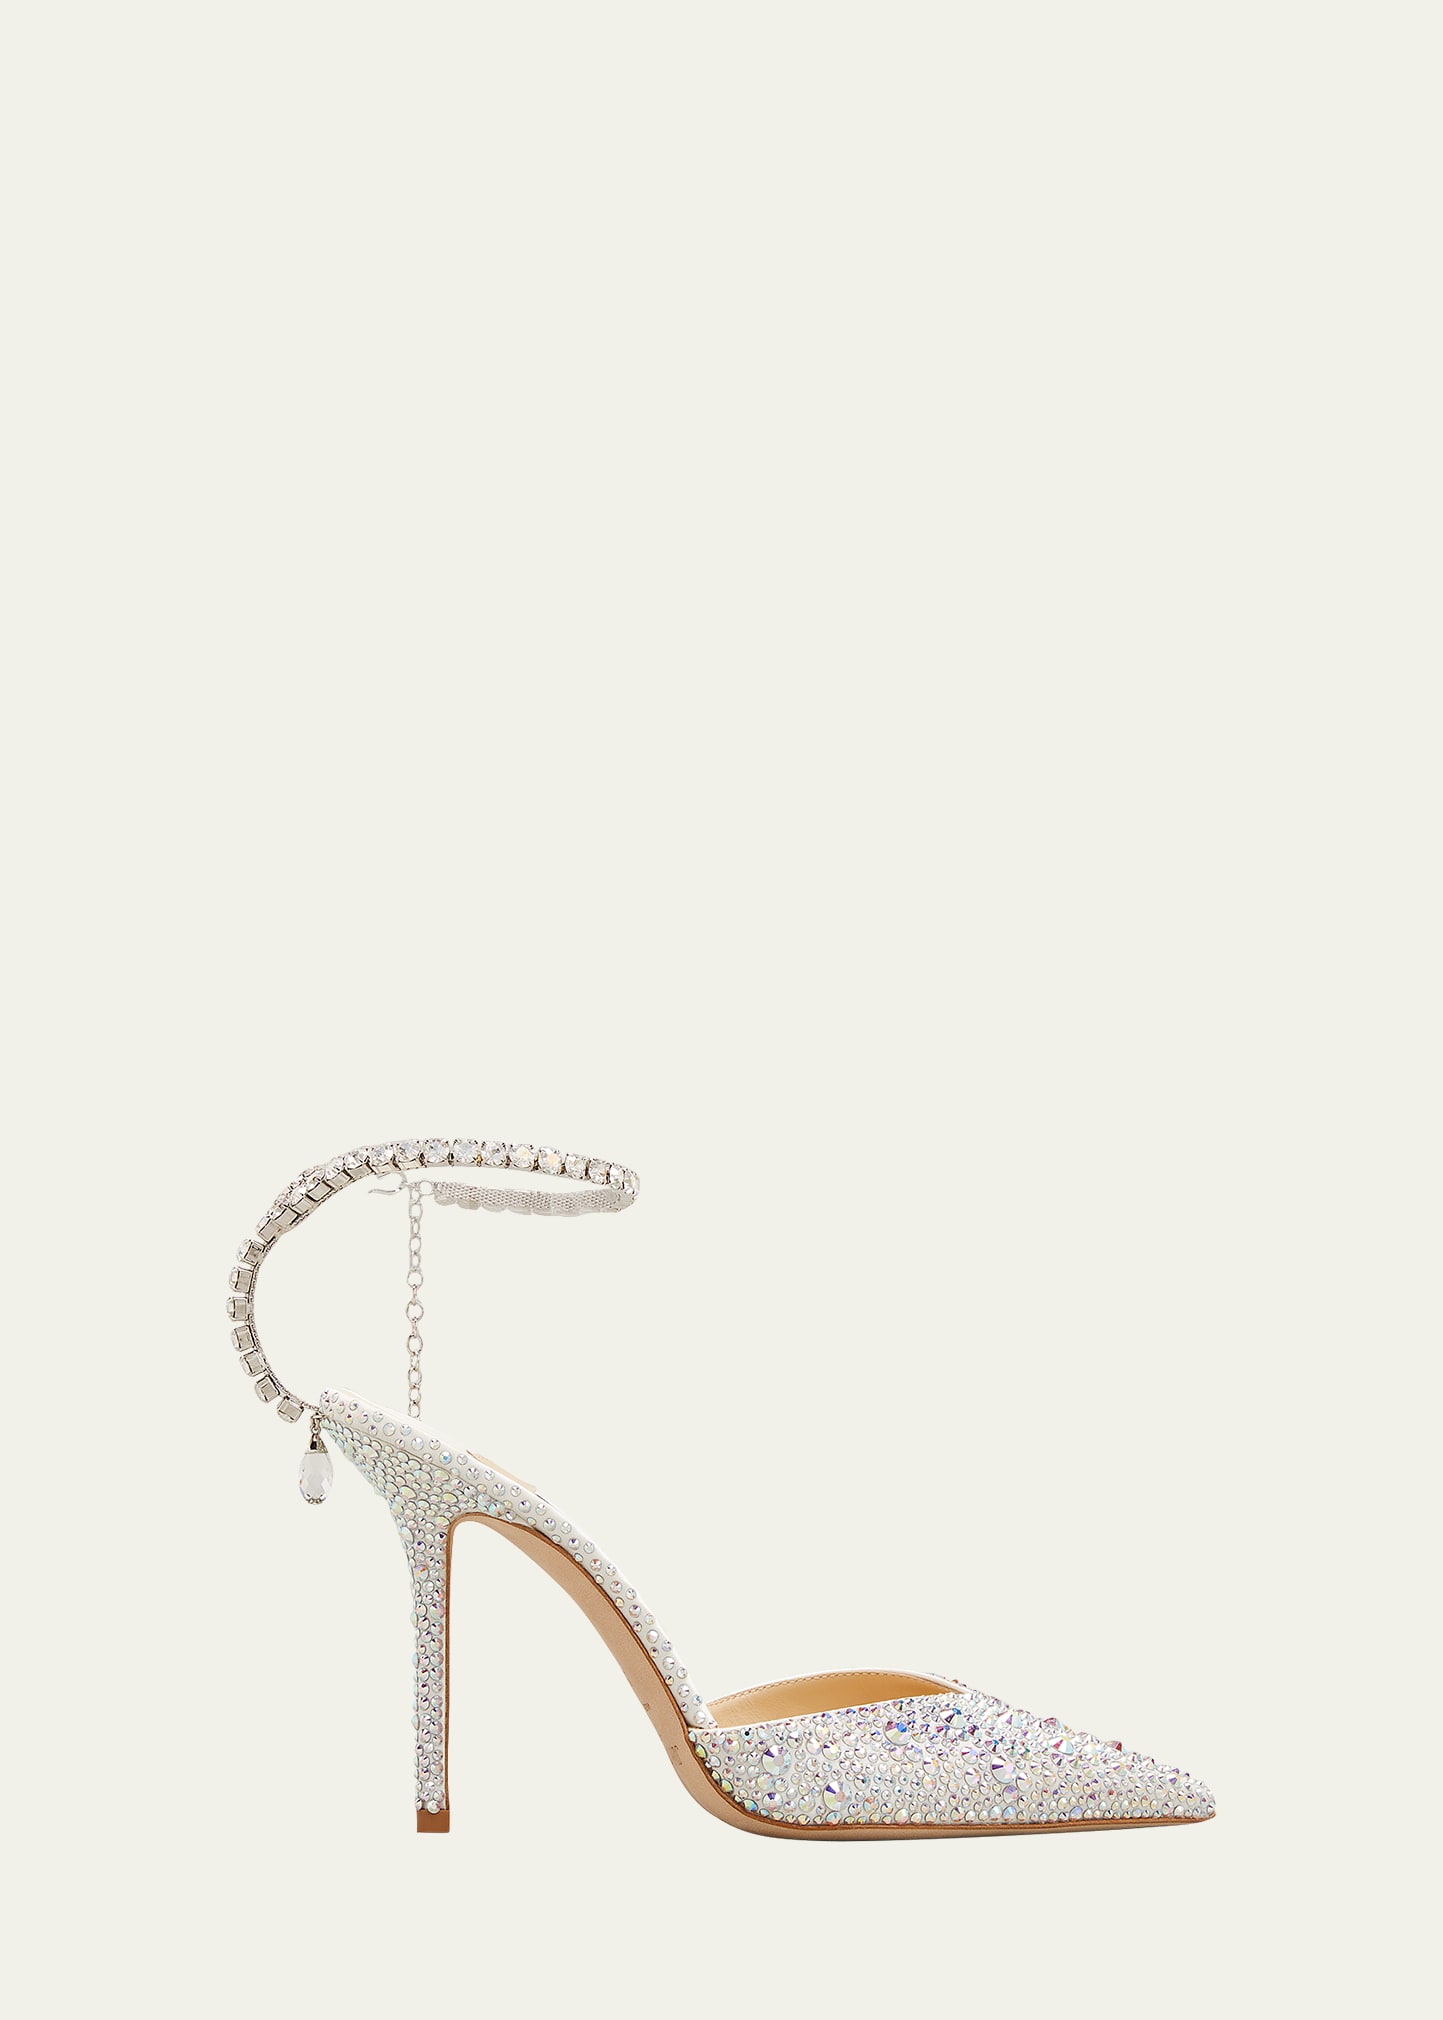 Saeda 100mm Pumps With Chain Ankle Detail | Bergdorf Goodman